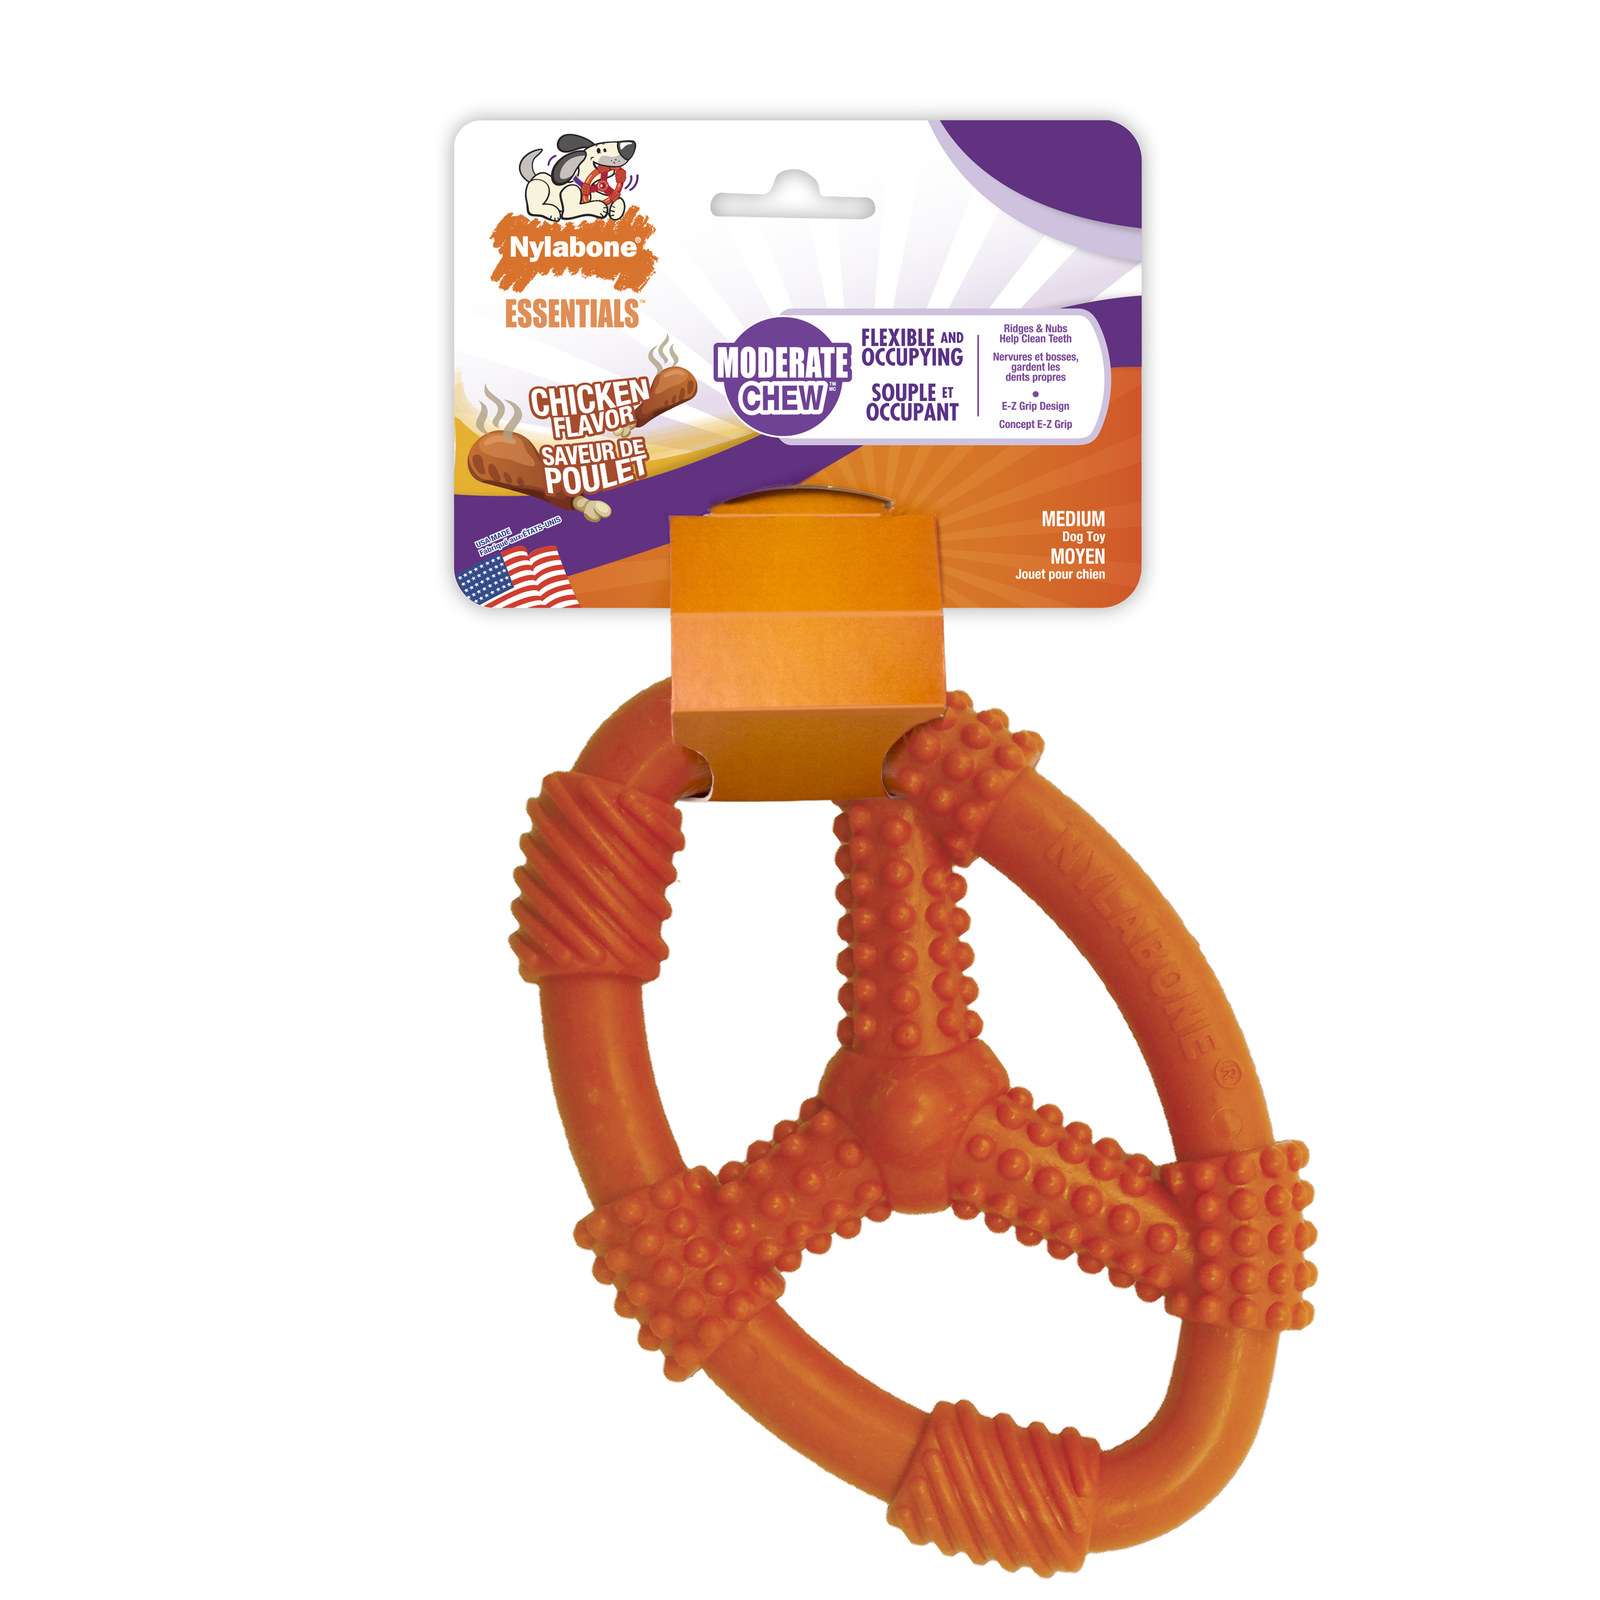 Nylabone chicken-flavored chew toy packaging with a durable rubber ring toy displayed for dogs